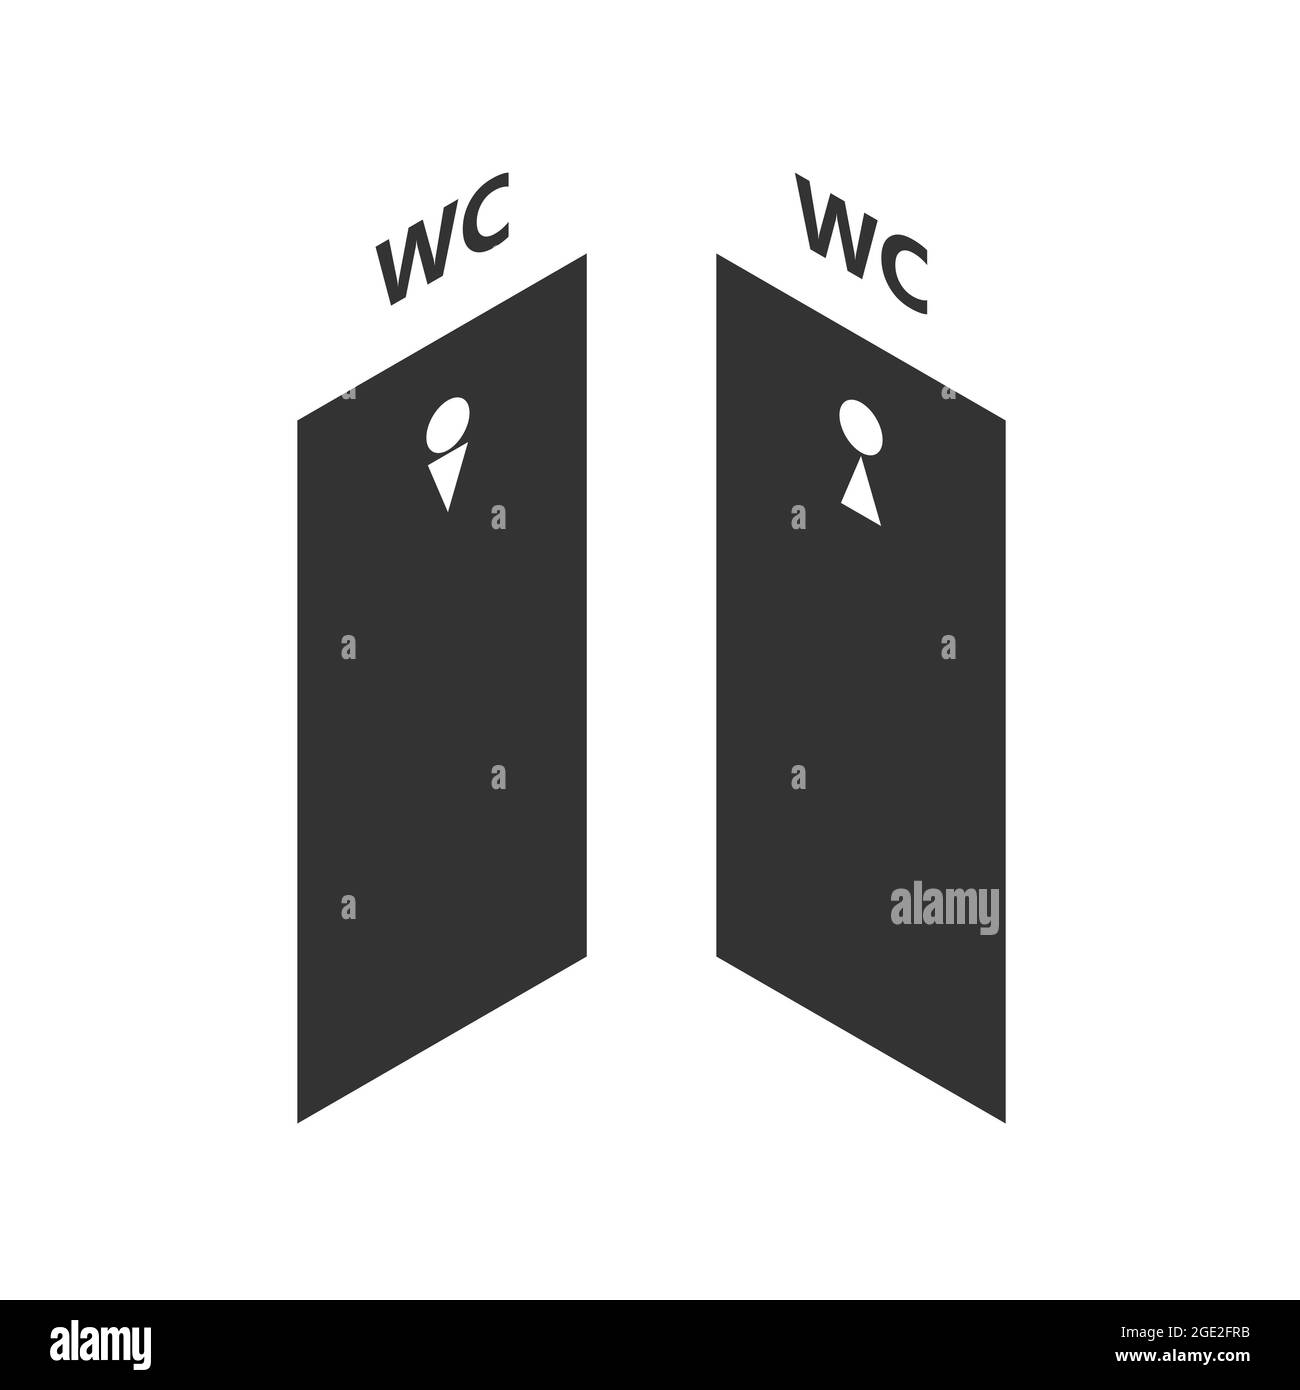 Toilet doors for men and women. Black and white silhouette. Wc sign. Isometric illustration Stock Photo